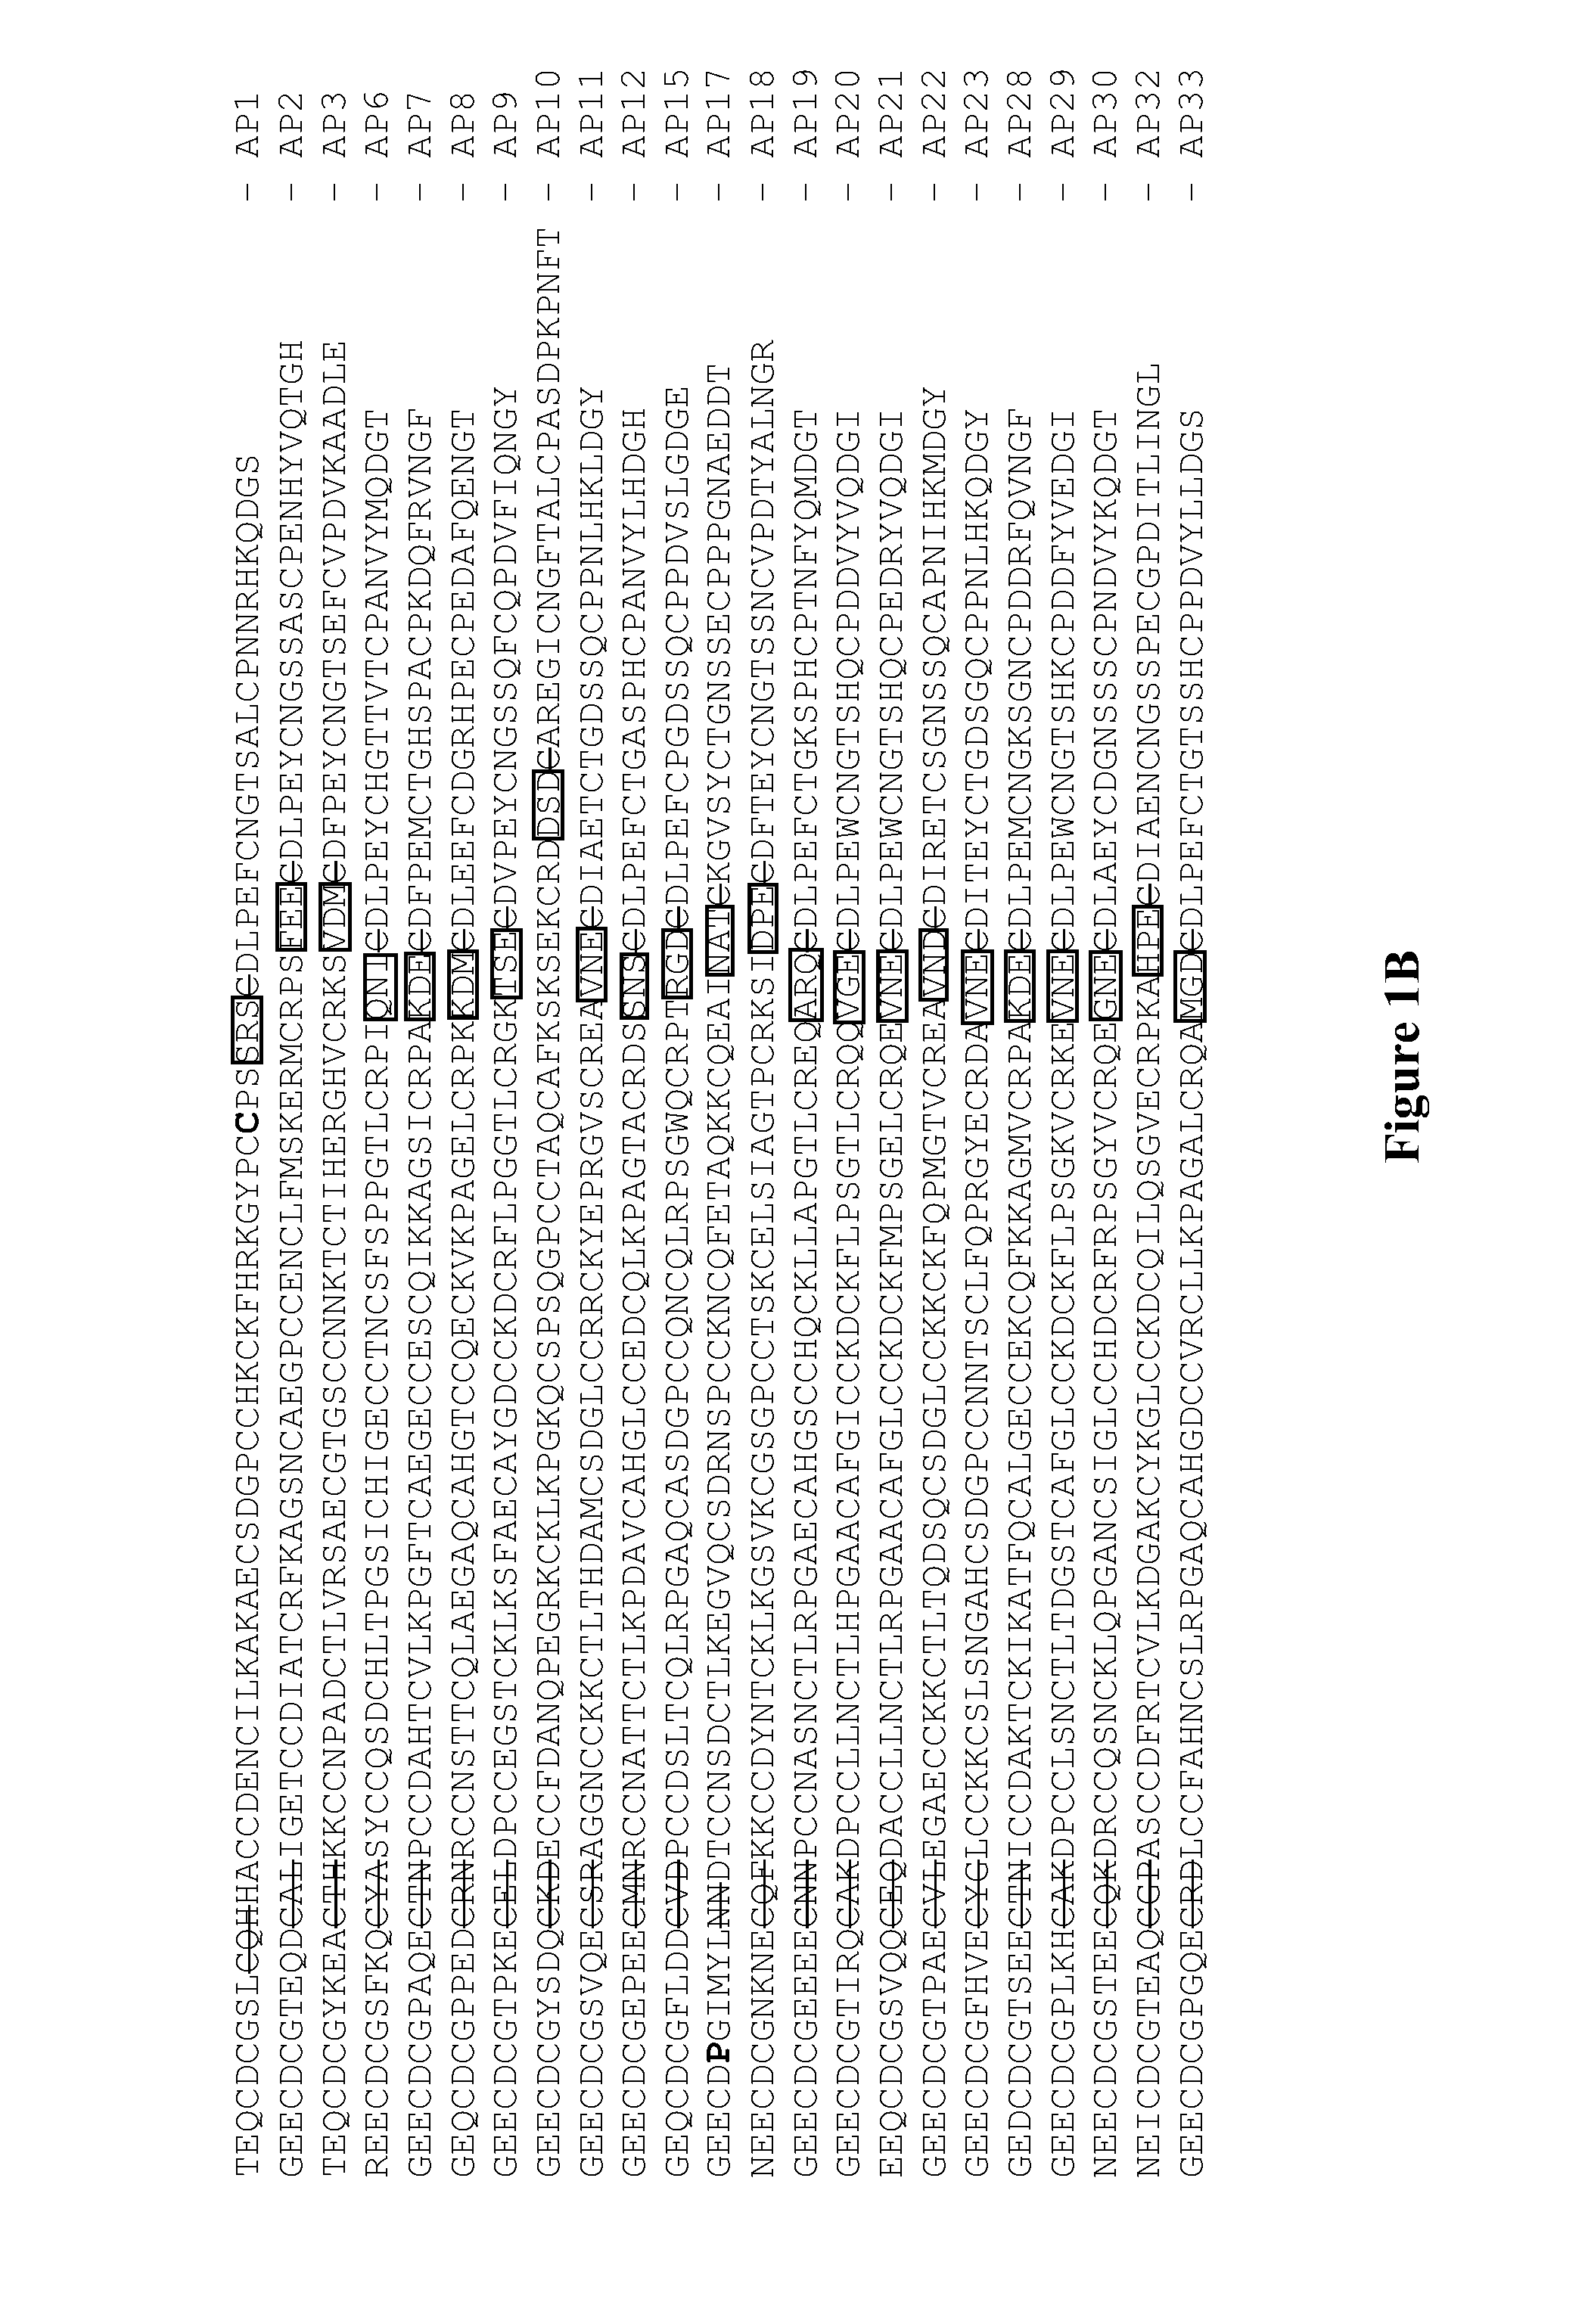 Modified adam disintegrin domain polypeptides and uses thereof